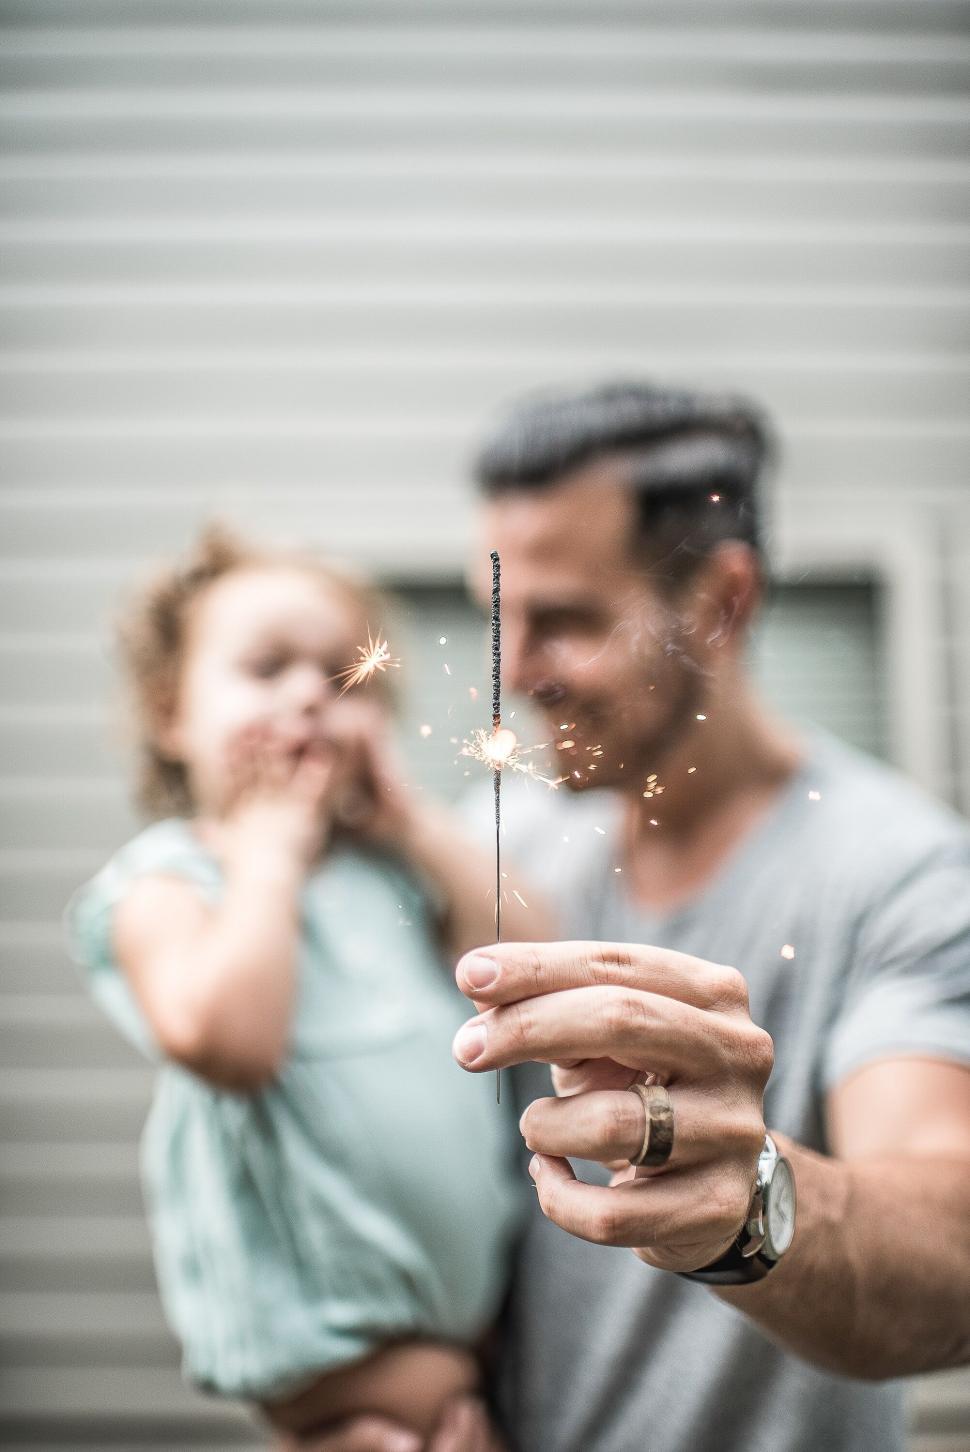 Free Image of Man and child holding sparklers with faces blurred 